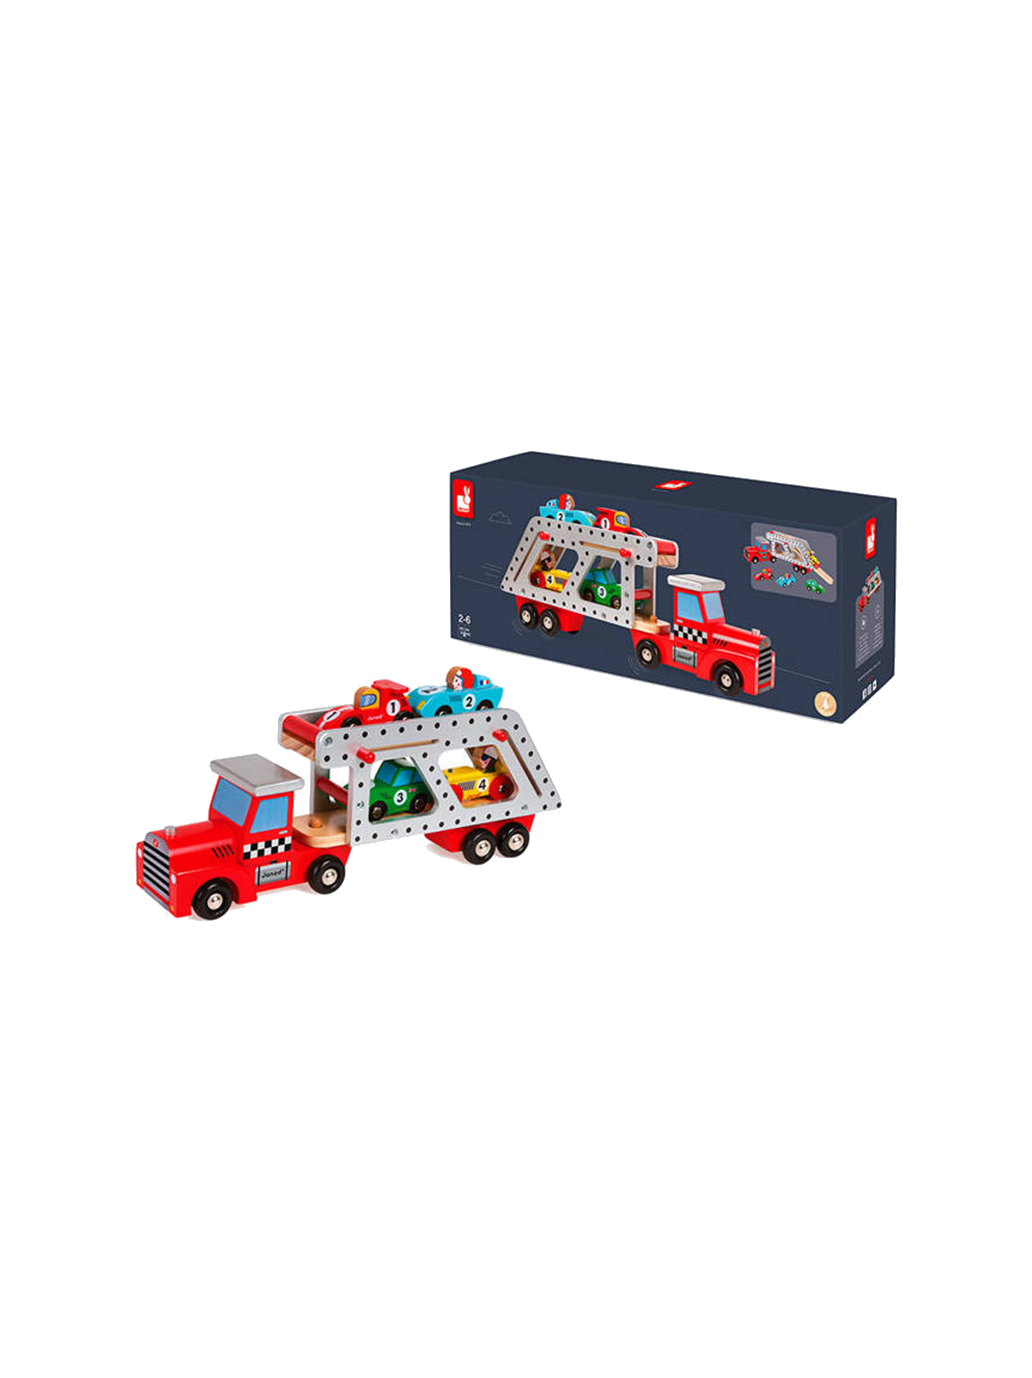 Transporter lorry with cars